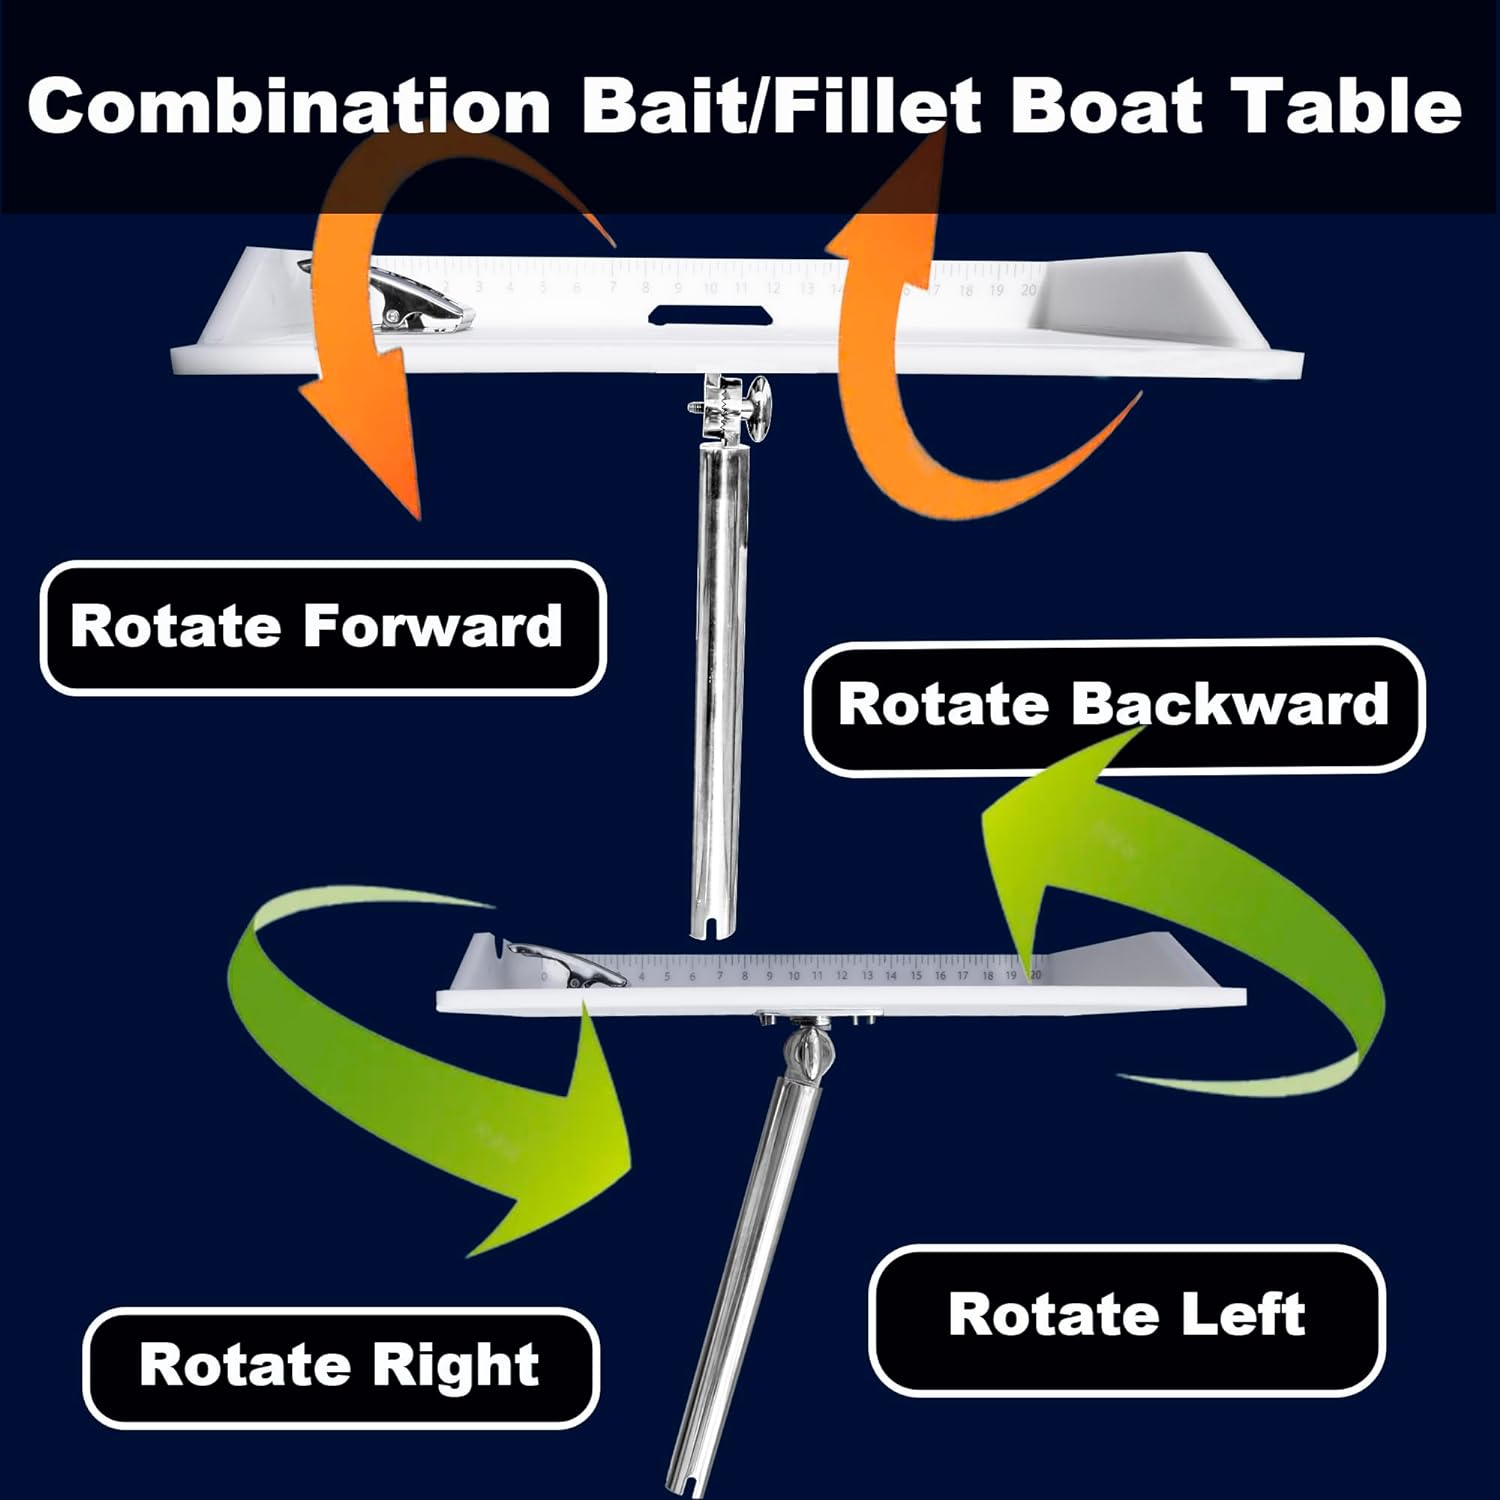 Stainless Boat Cutting Board - Fish Cleaning Bait Table , Fish Fillet Board with Clamp , Rod Holder Bait Station for Boat Accessories Marine - Stainless Boat Cutting Board Review